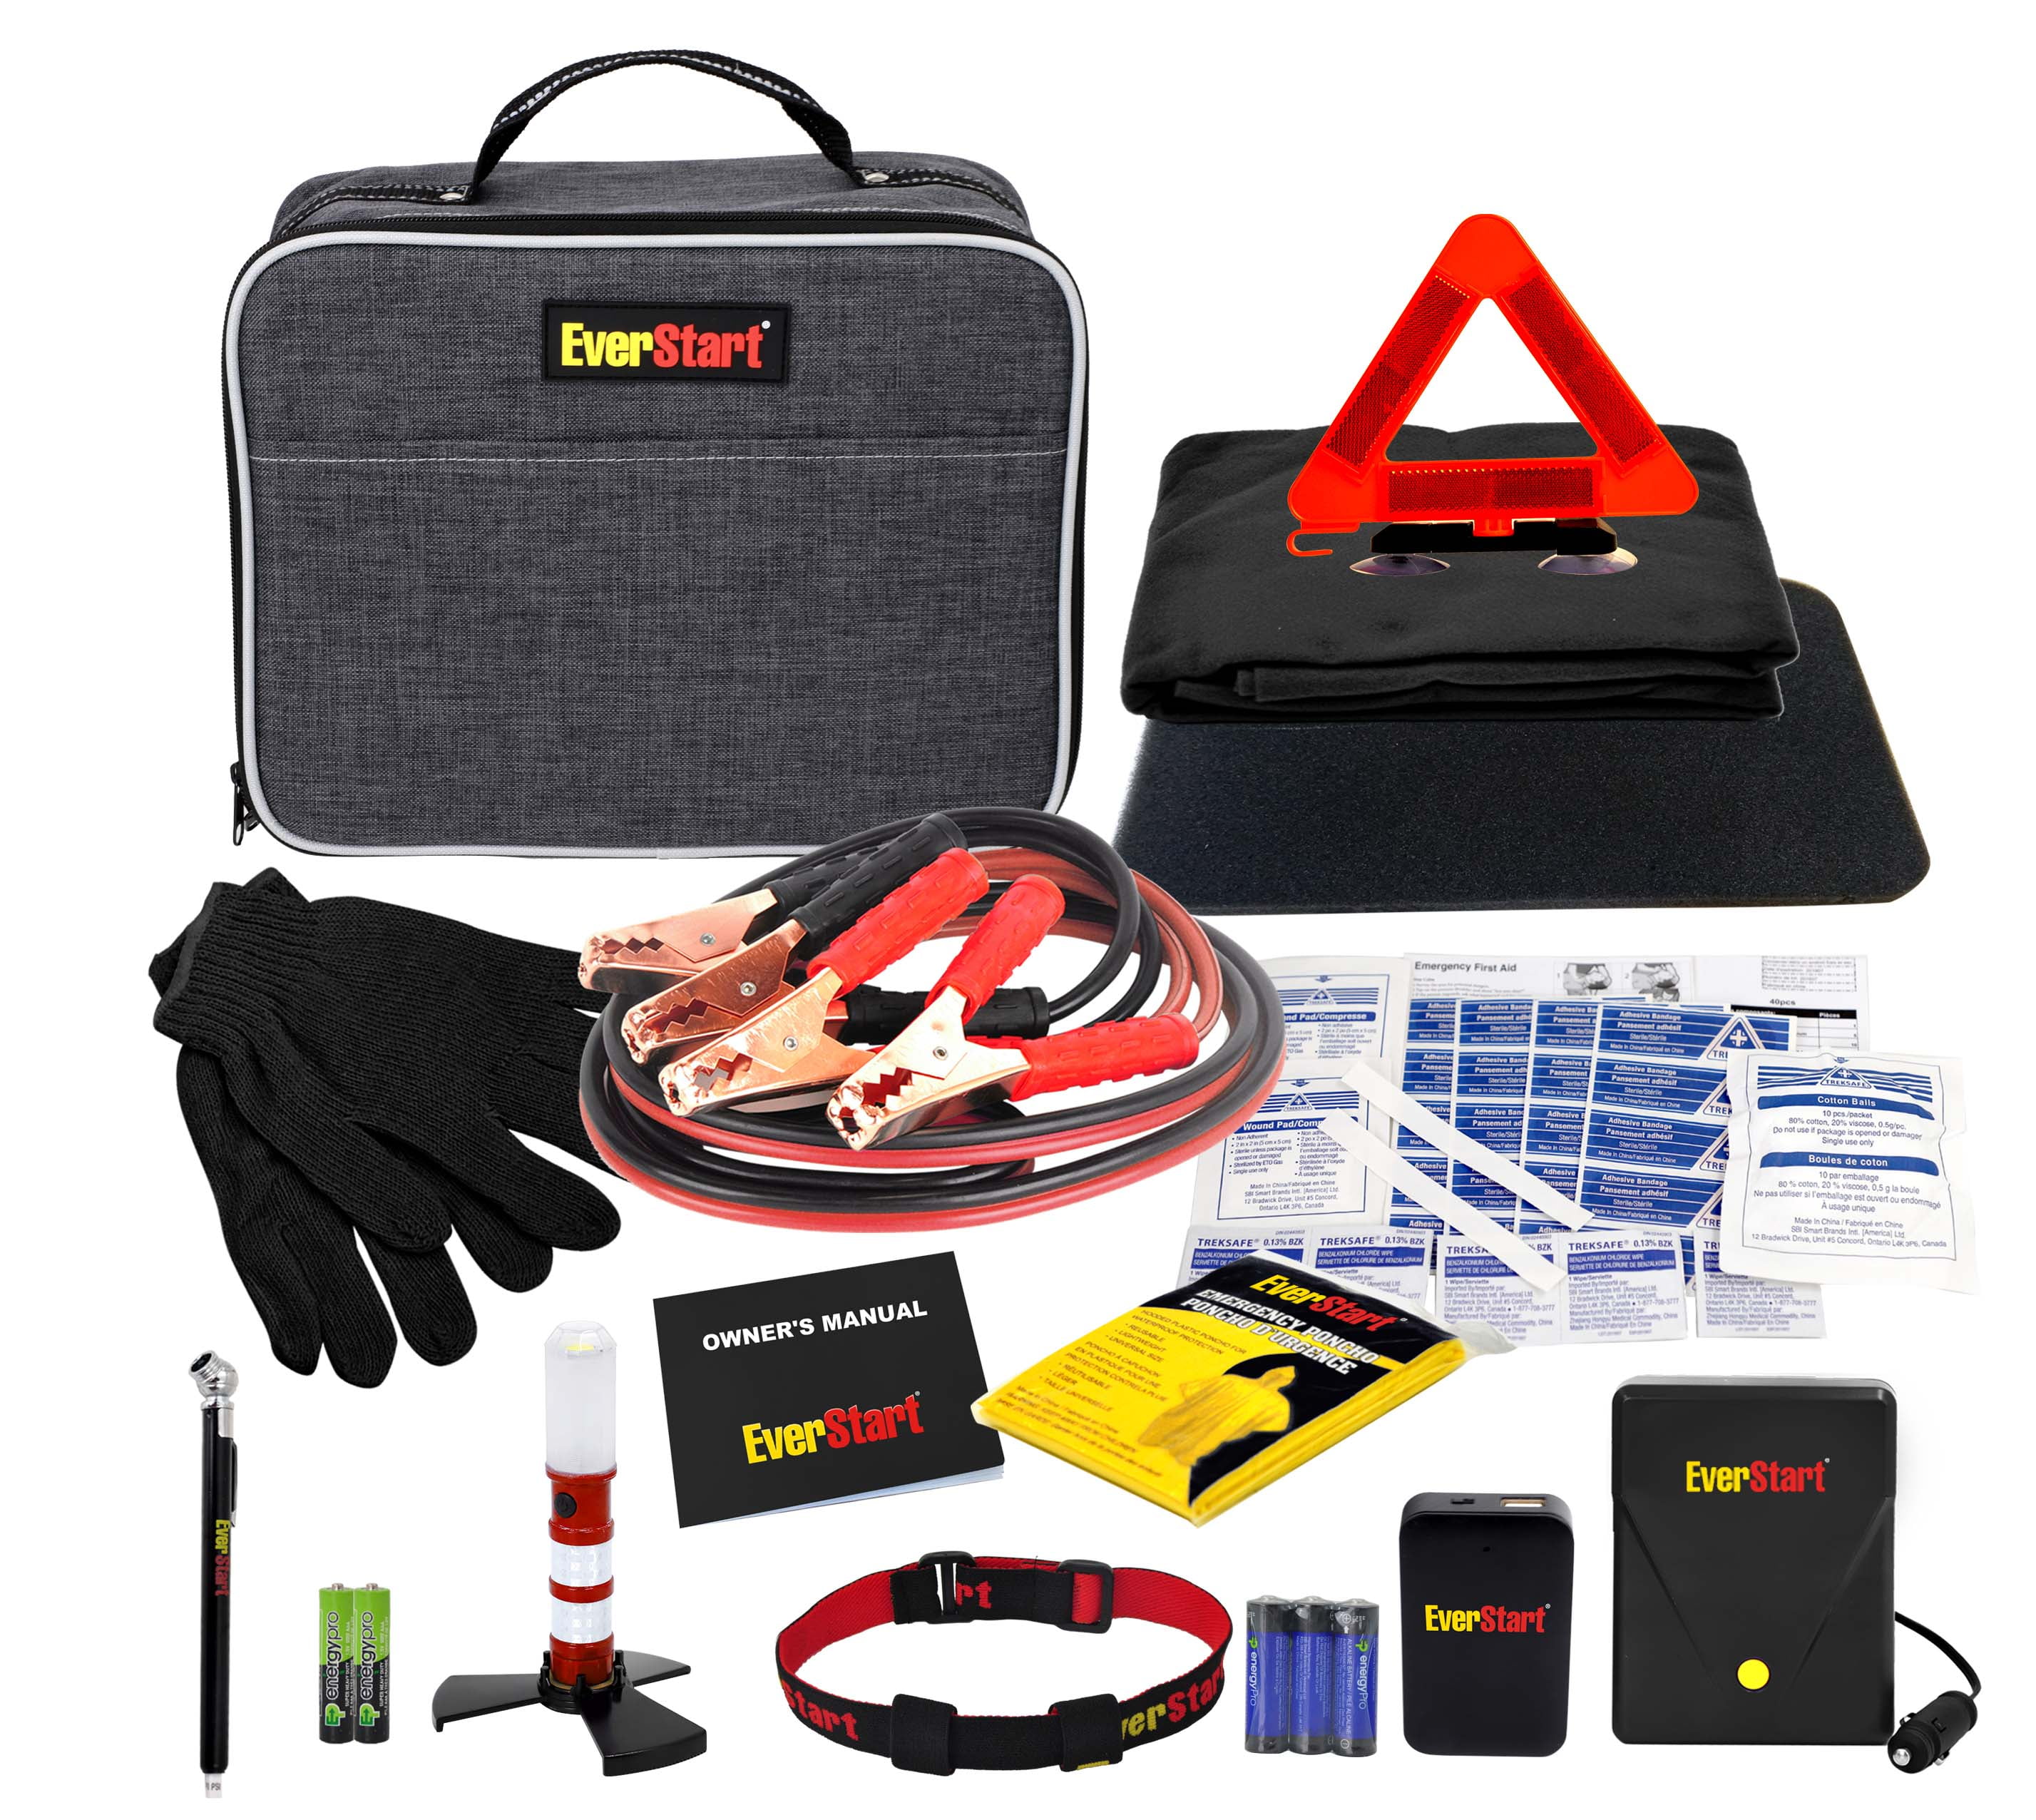 Car Roadside Emergency Assistance Tool Kit with Jumper CableAuto Travel Safet...